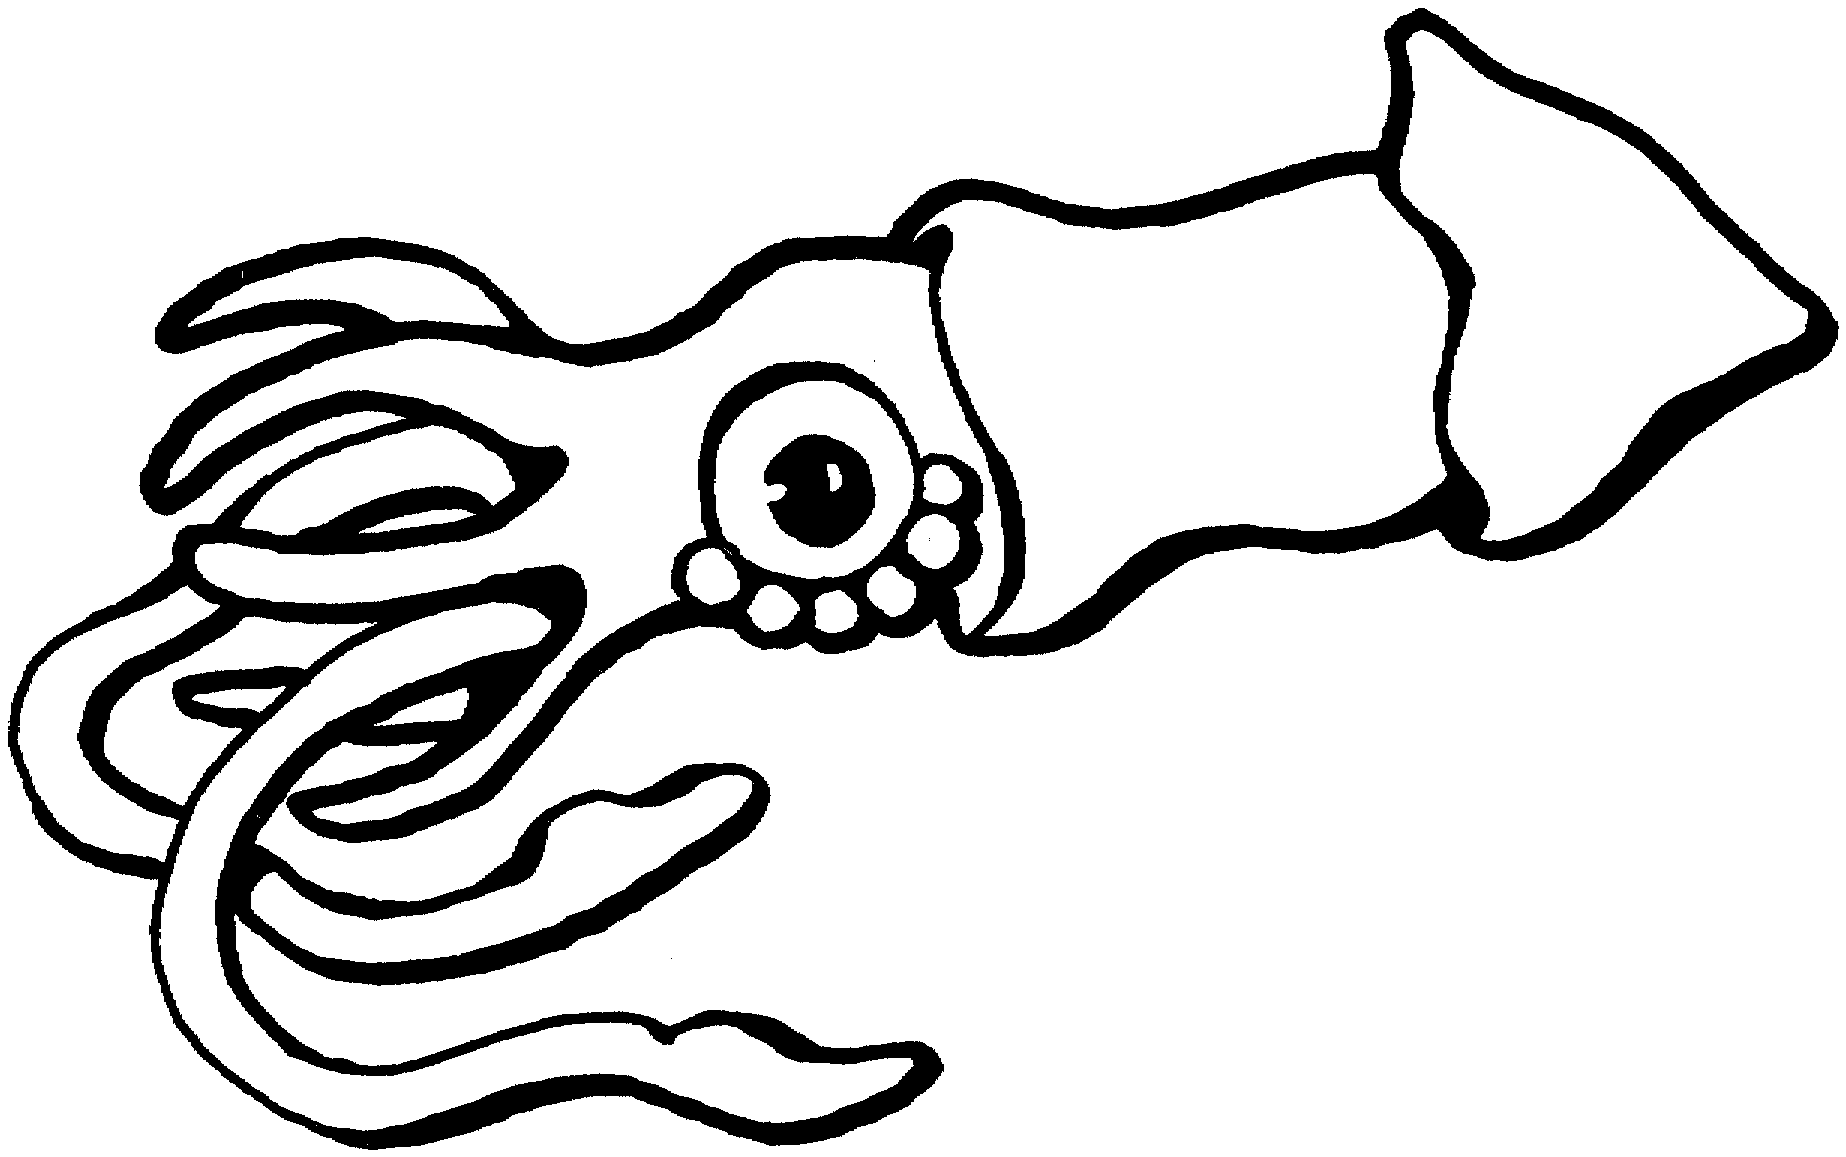 squid coloring pages squid coloring pages to download and print for free squid coloring pages 